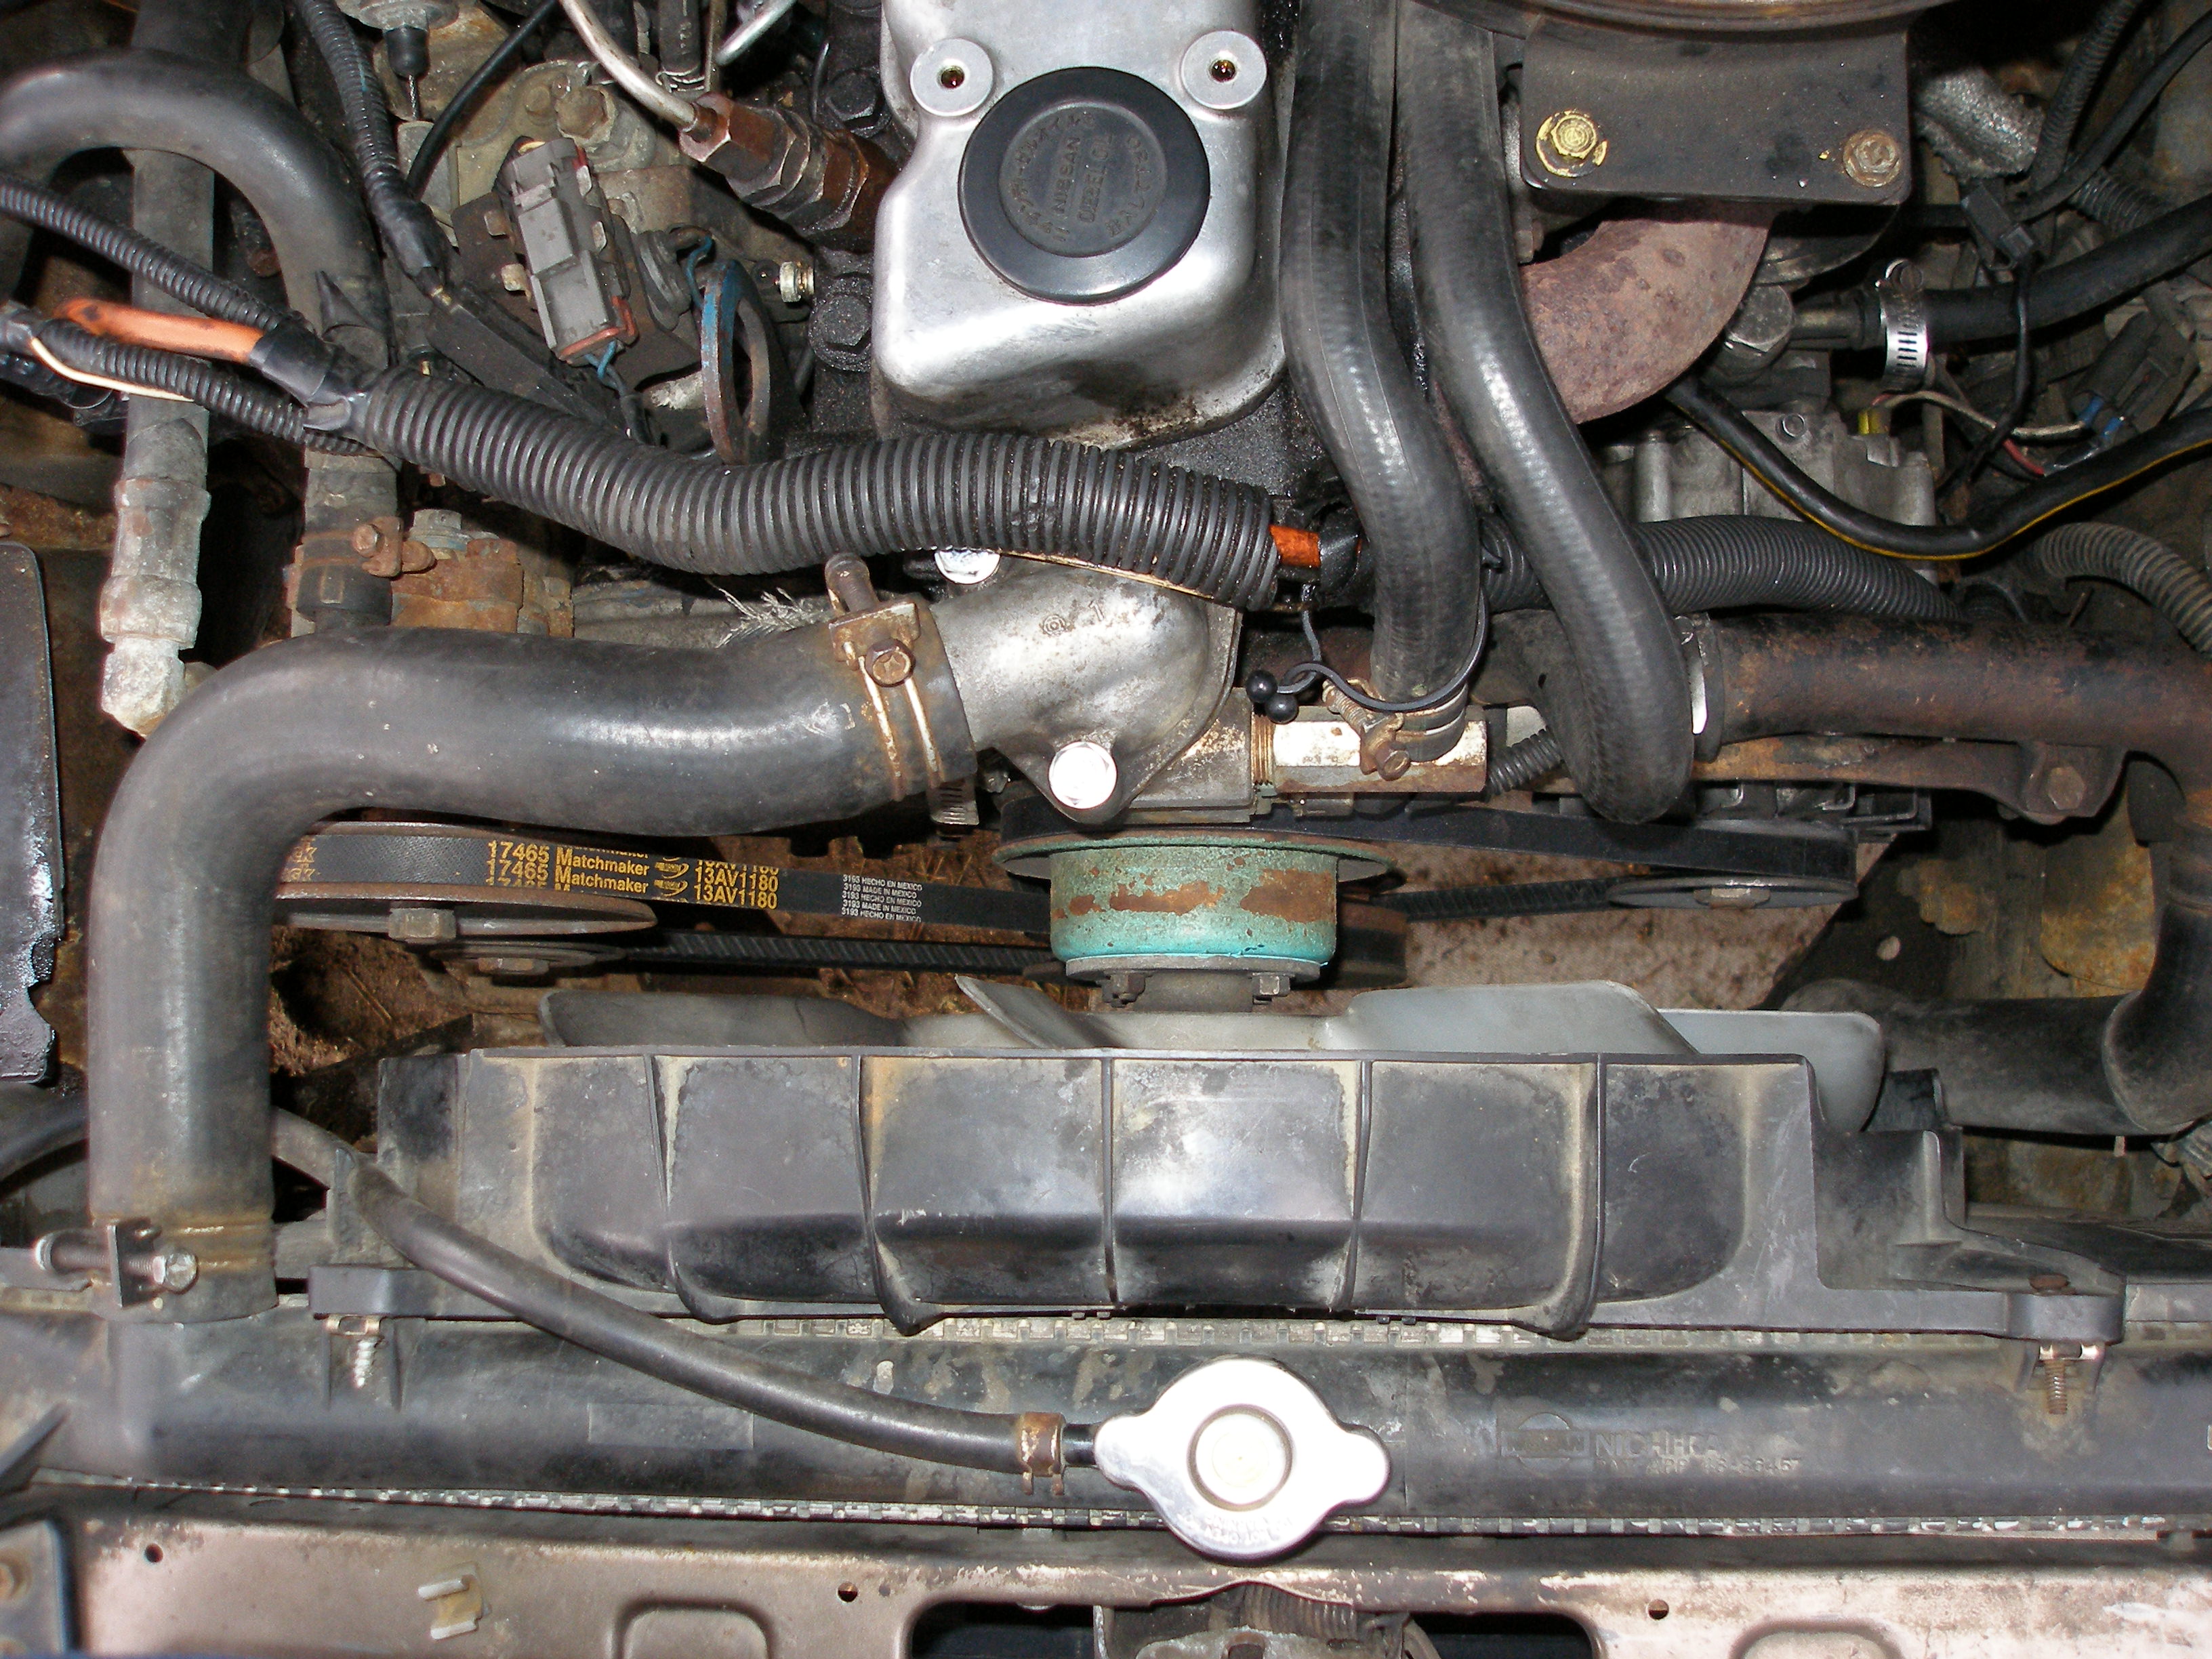 NissanDiesel forums • View topic Overheat coolant SD25